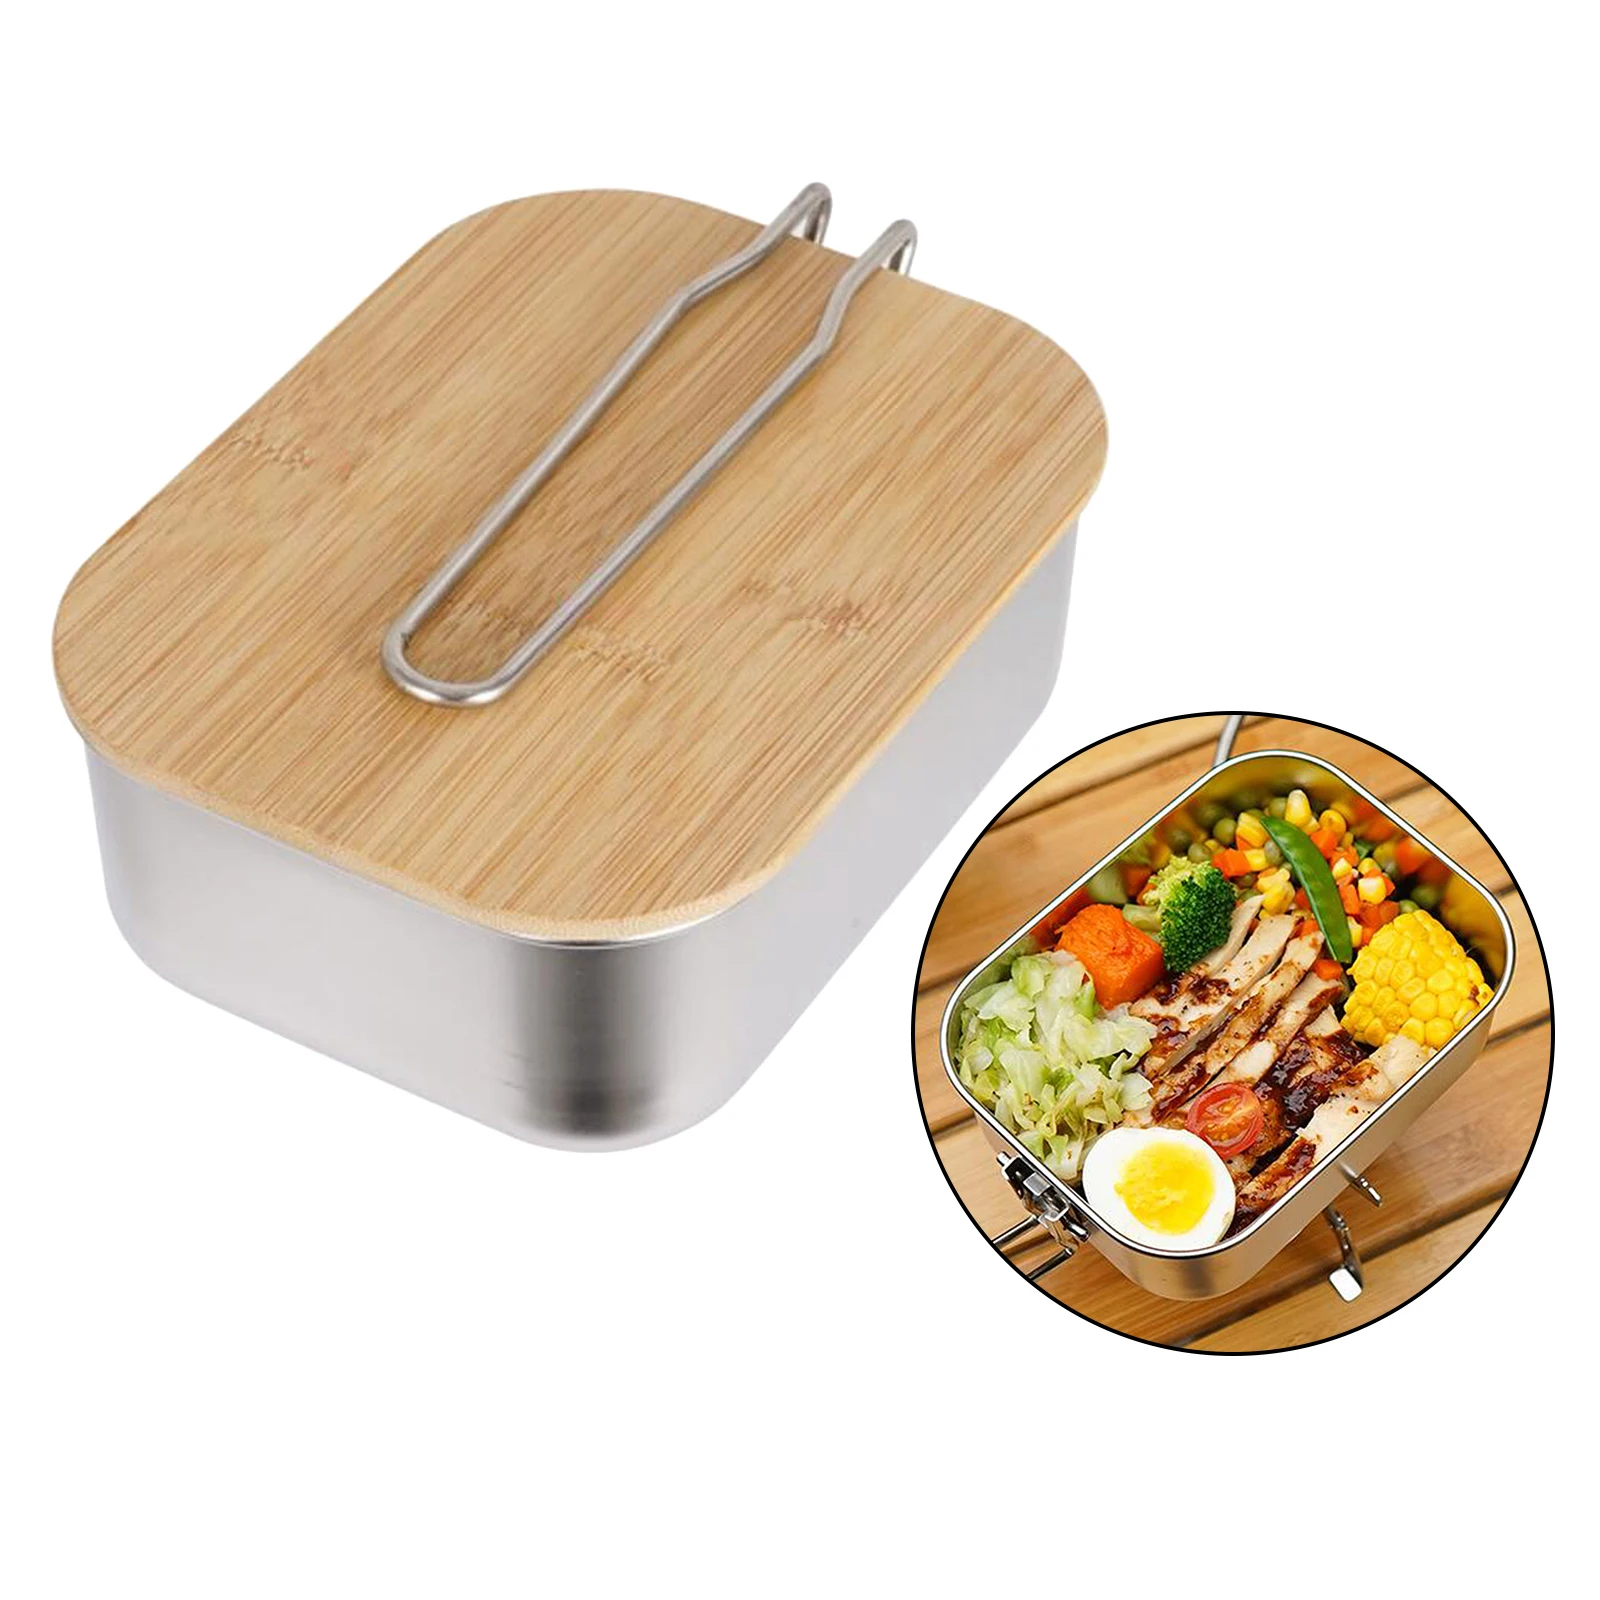 Stainless Steel Lunch Box Wood Lid Bento Box Portable Food Container Storage